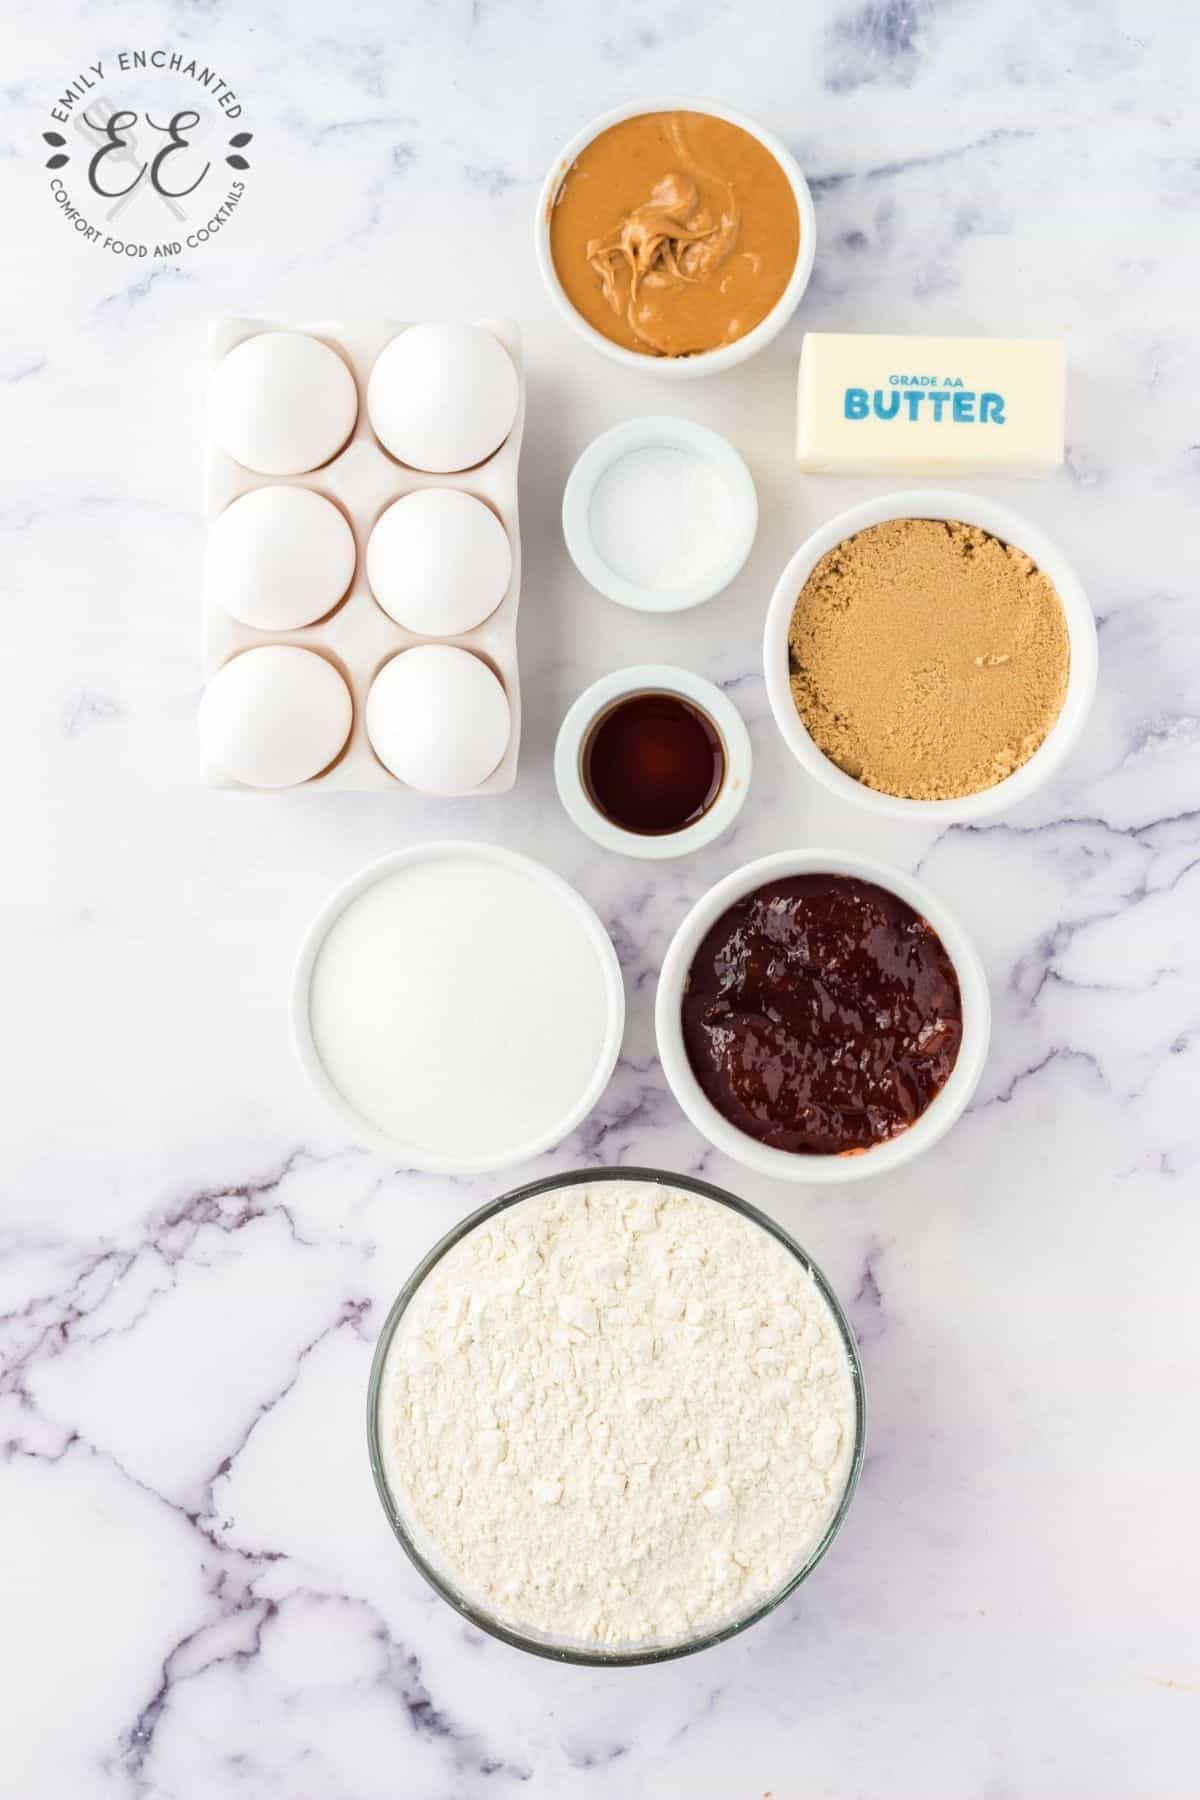 Flat lay of ingredients for peanut butter cookies with jelly on a countertop